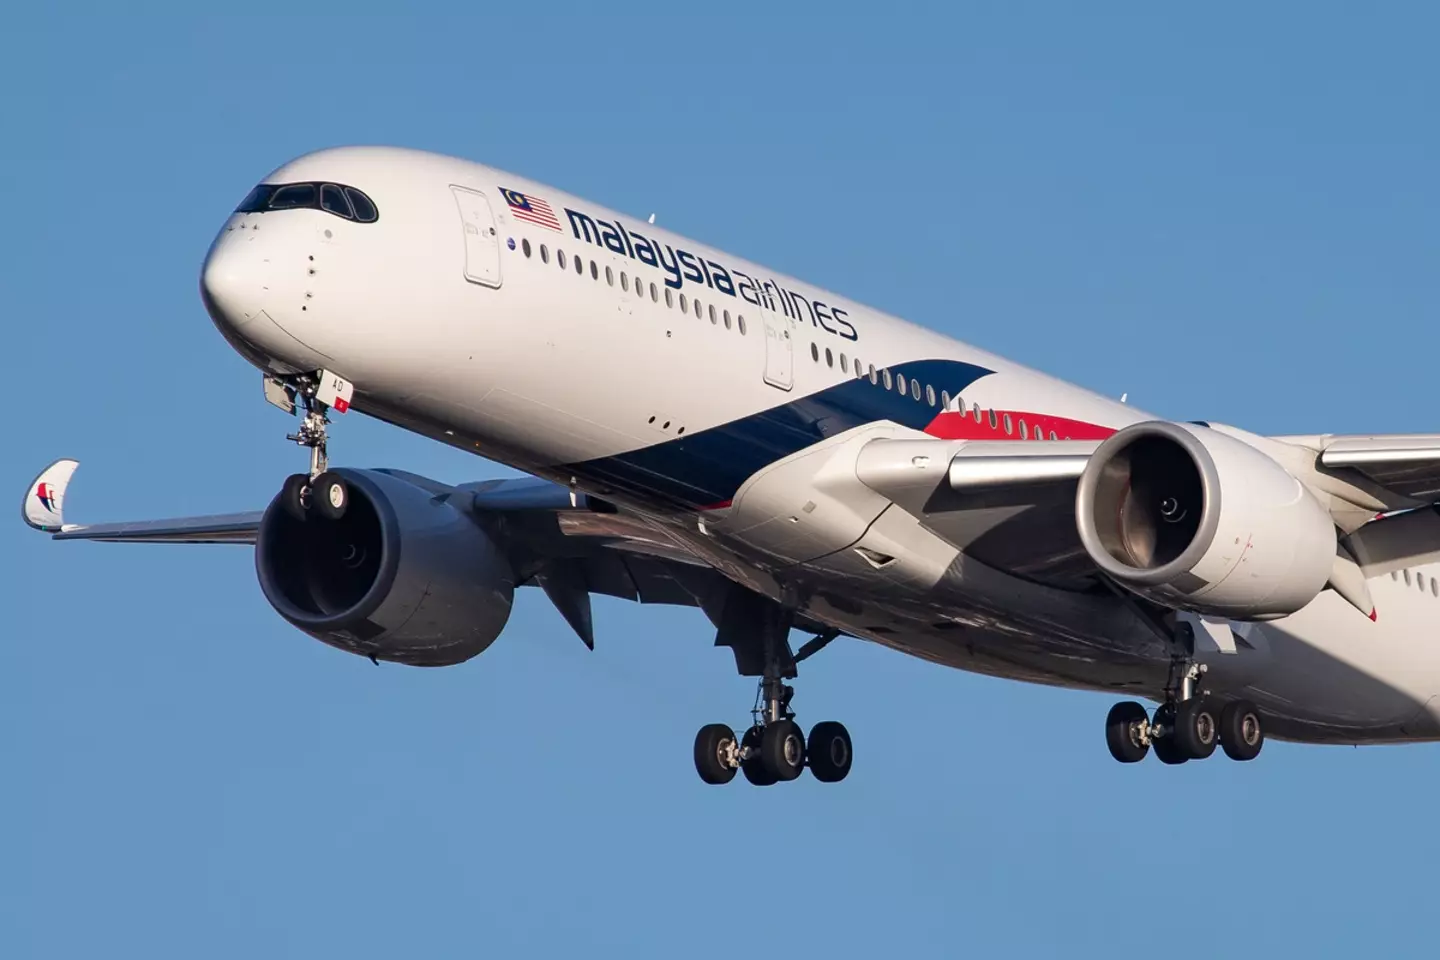 The MH370 plane has been missing for over nine years and people are furious over an unanswered phone call.